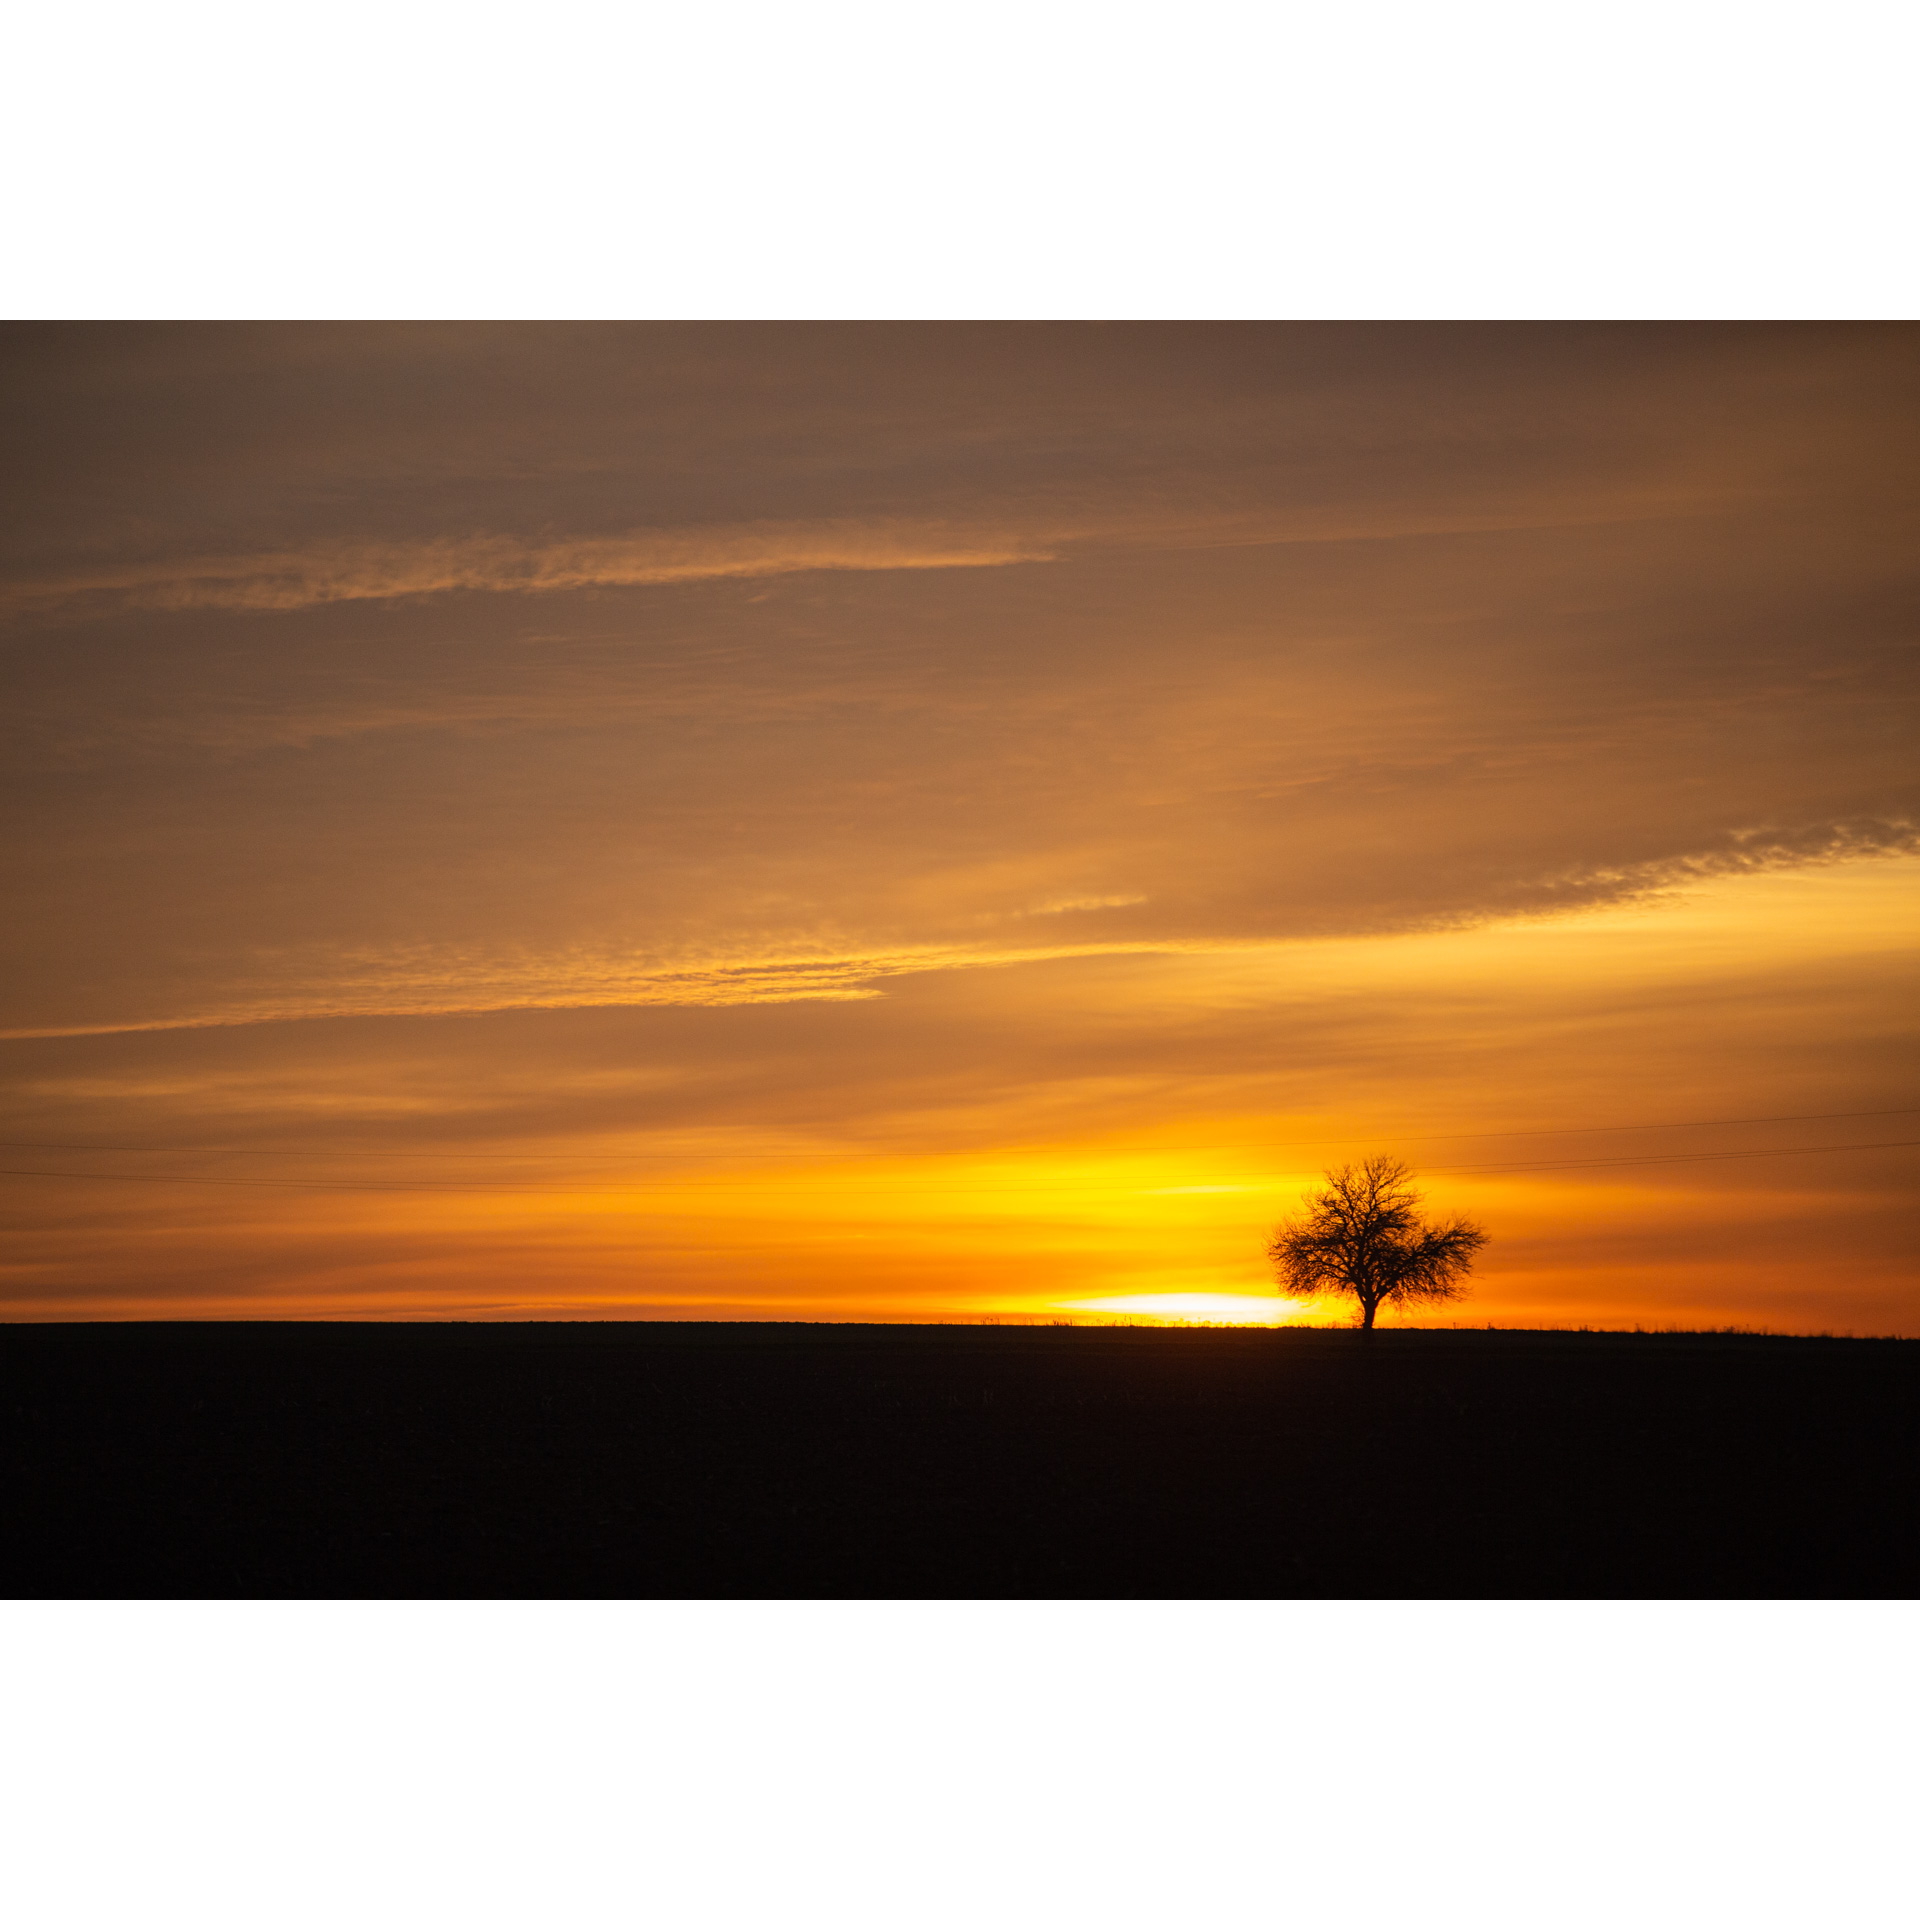 Lonely tree against the orange sky